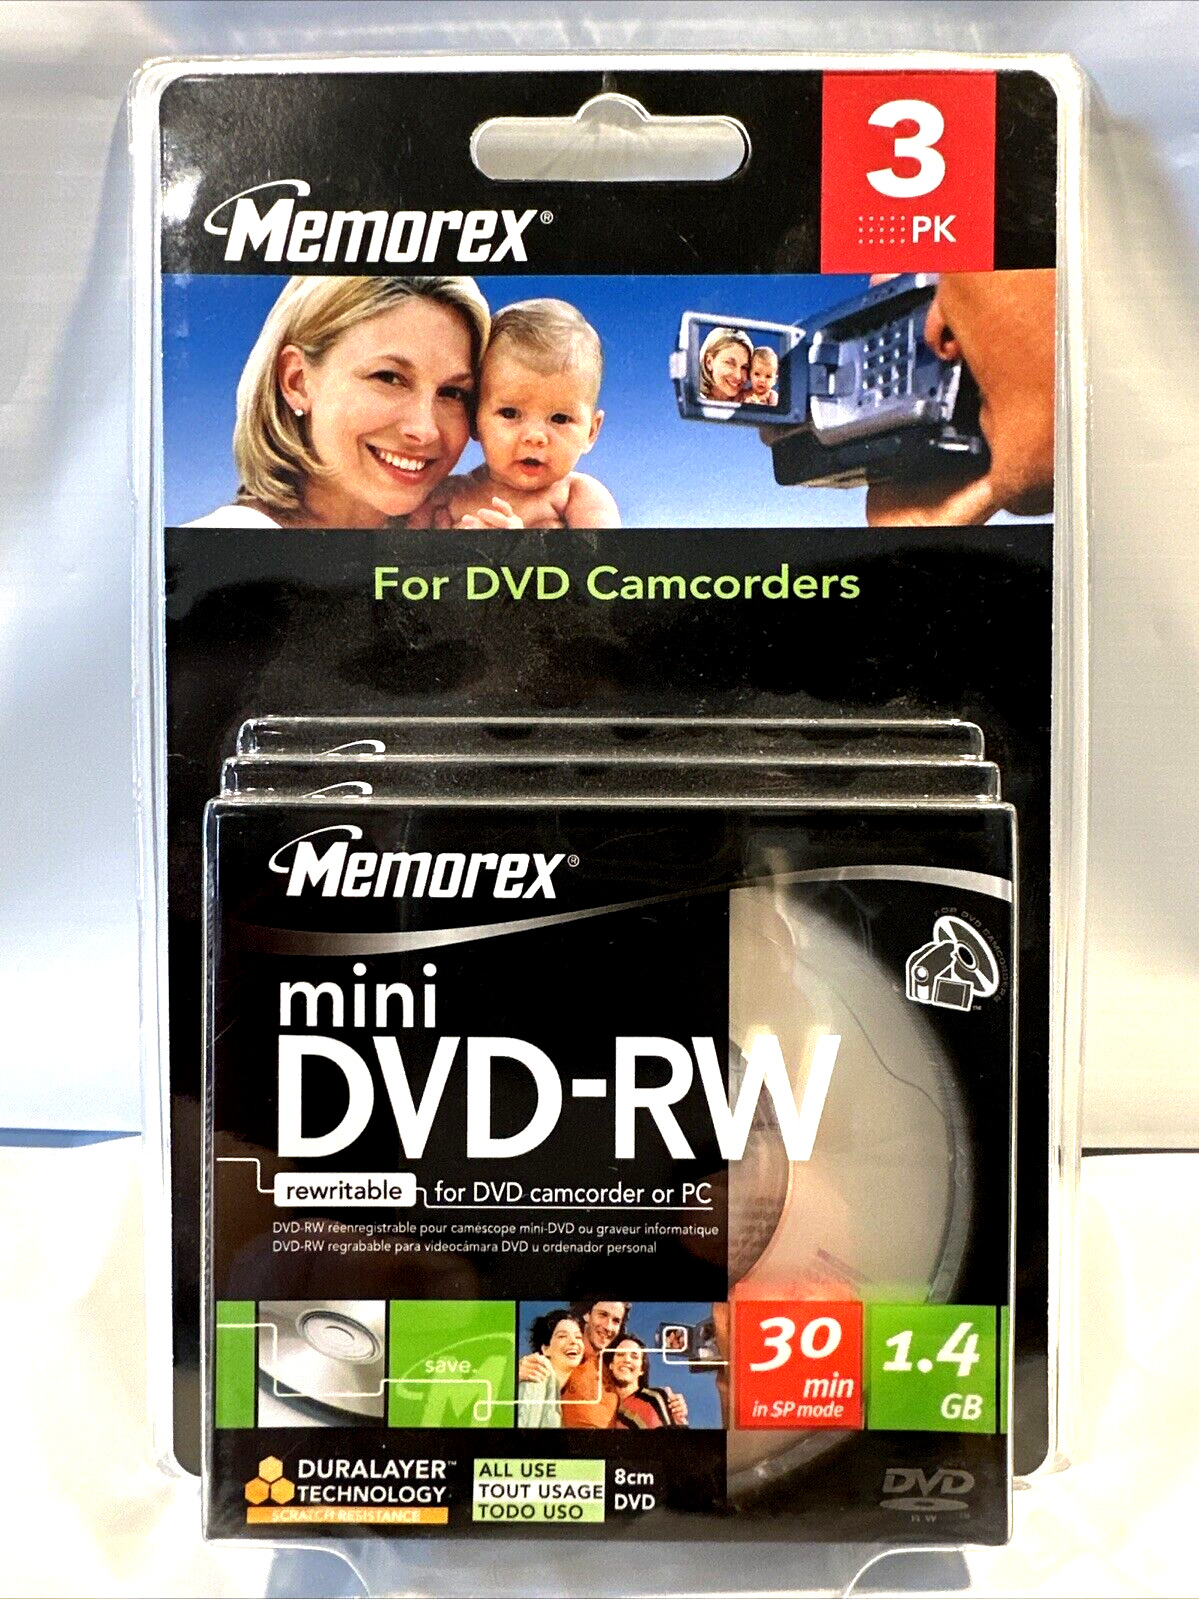 Memorex 3-Pack 2x Mini DVD-RW Discs with Cases 1.4 GB - For DVD Camcorders or PC